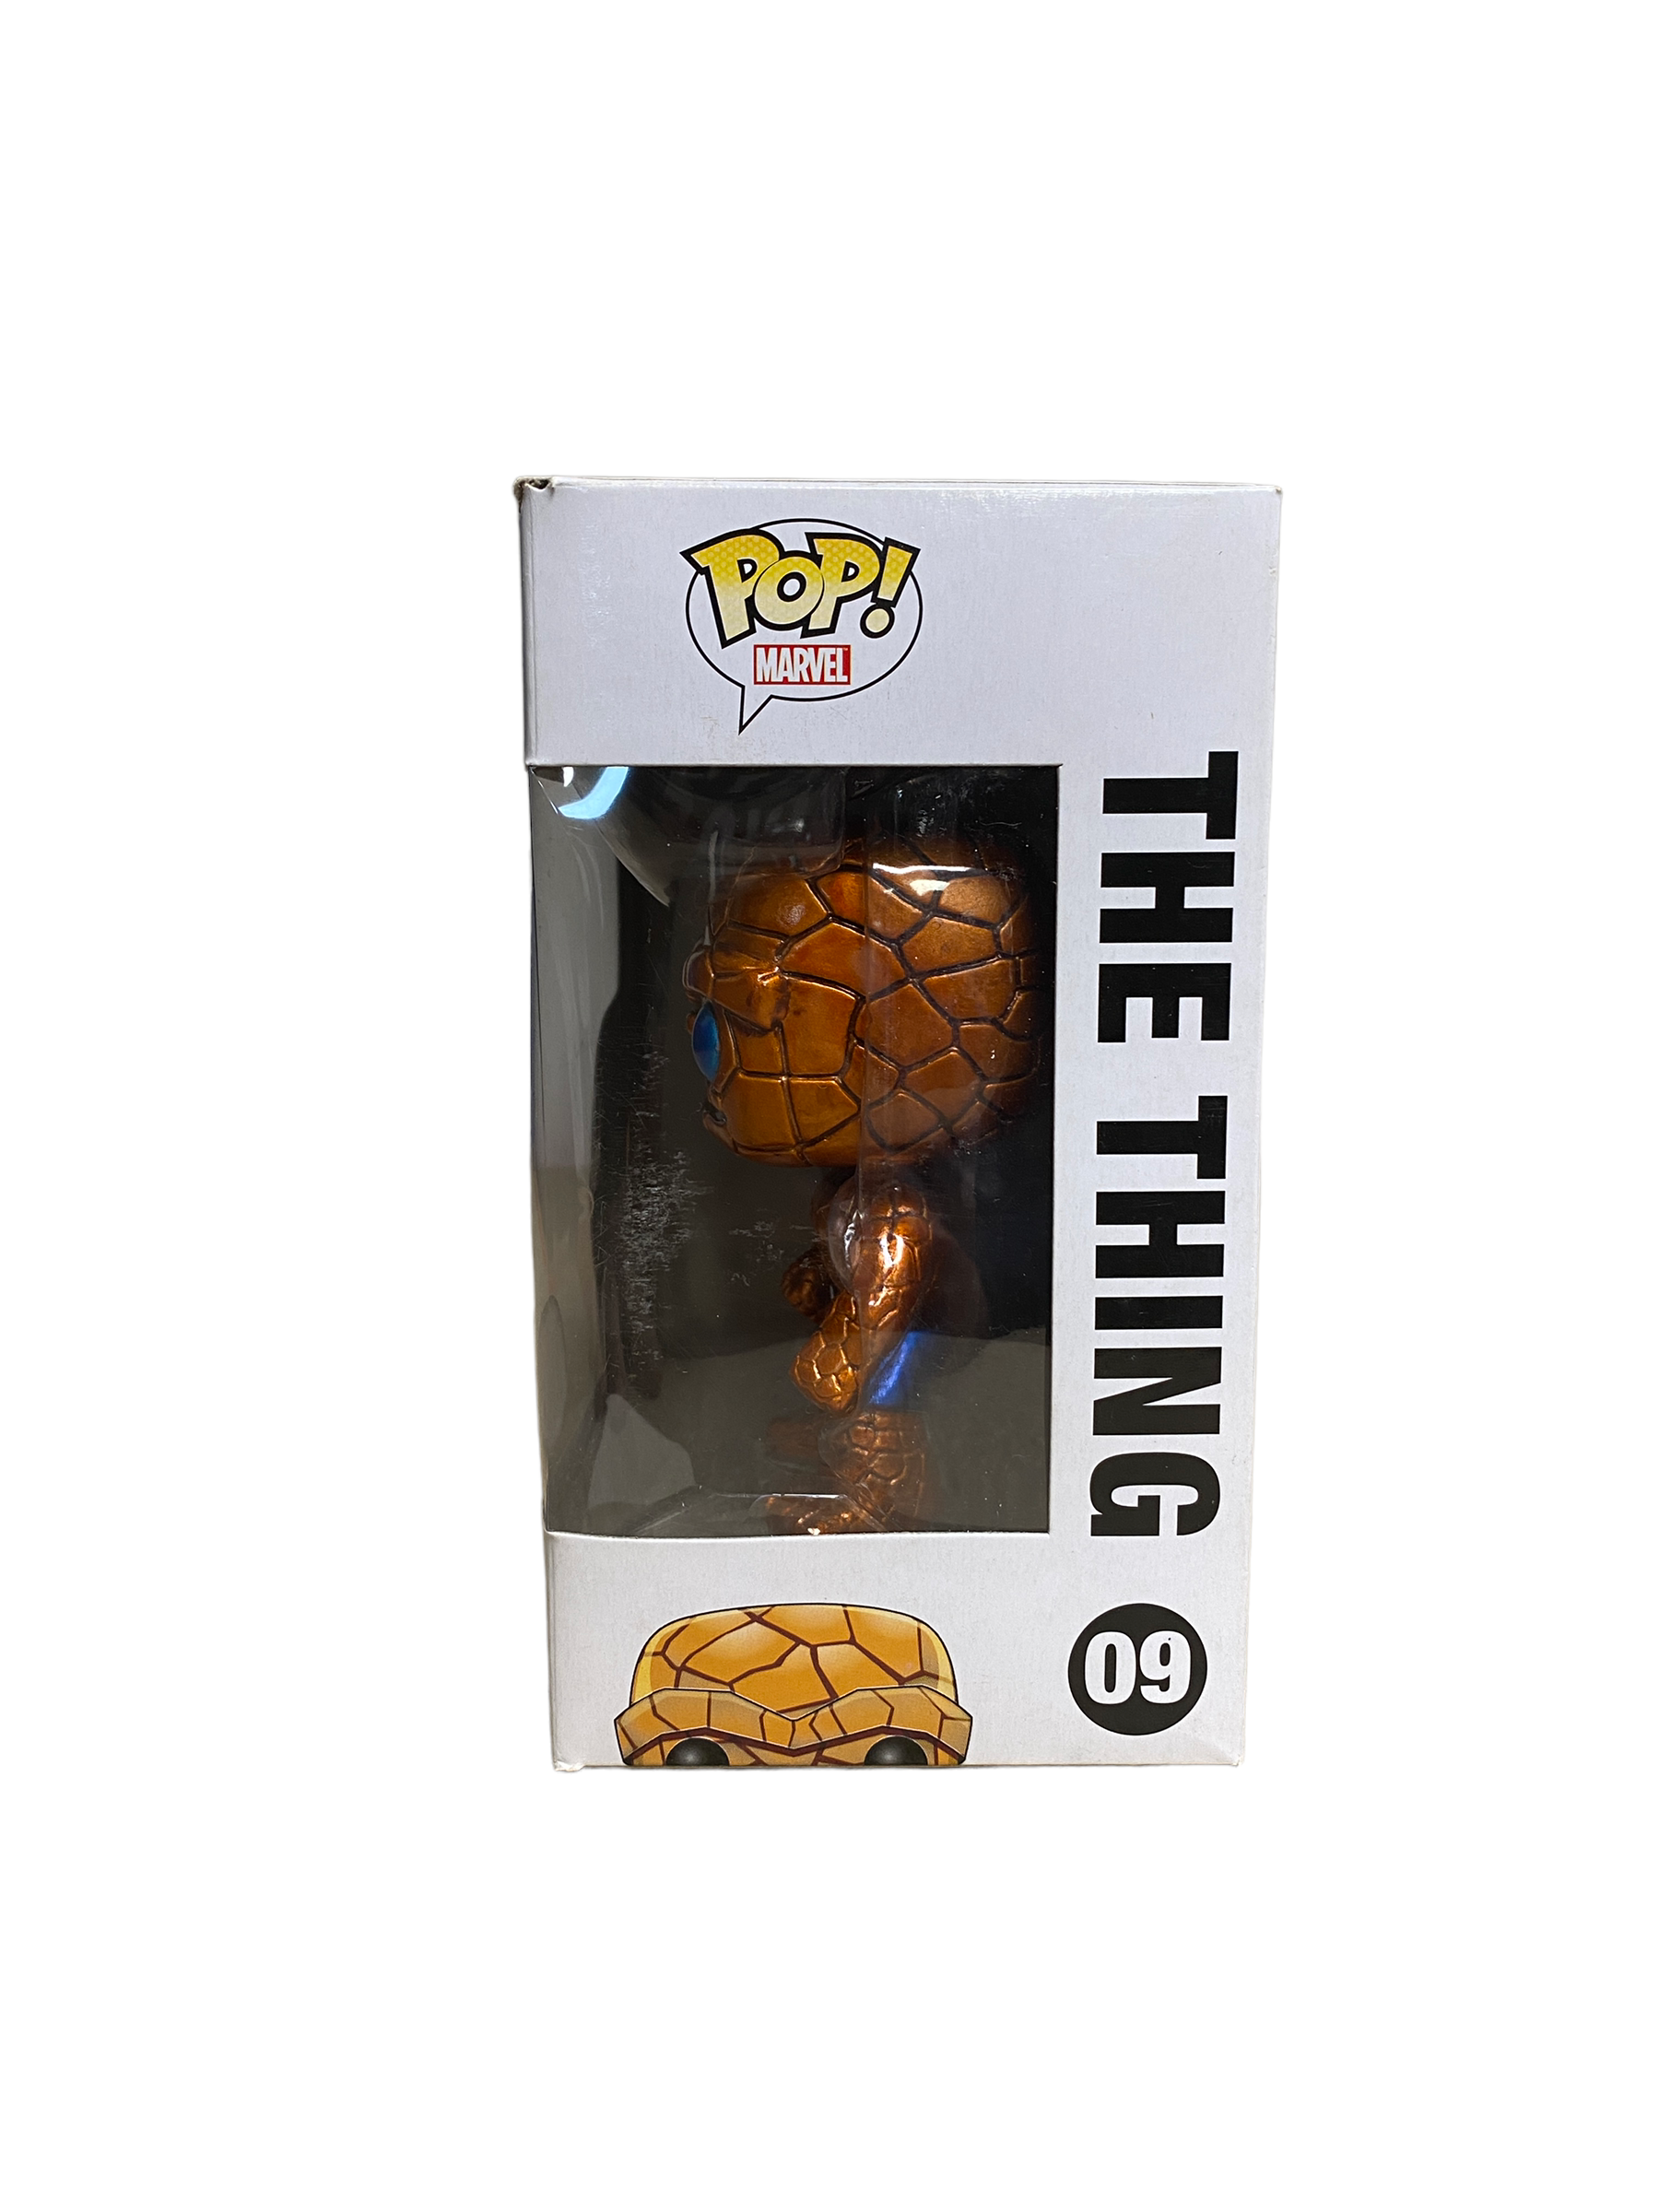 The Thing #09 (Metallic - Blue Eyes) Funko Pop! - Marvel Universe - SDCC 2011 Exclusive LE480 Pcs - Condition 8/10